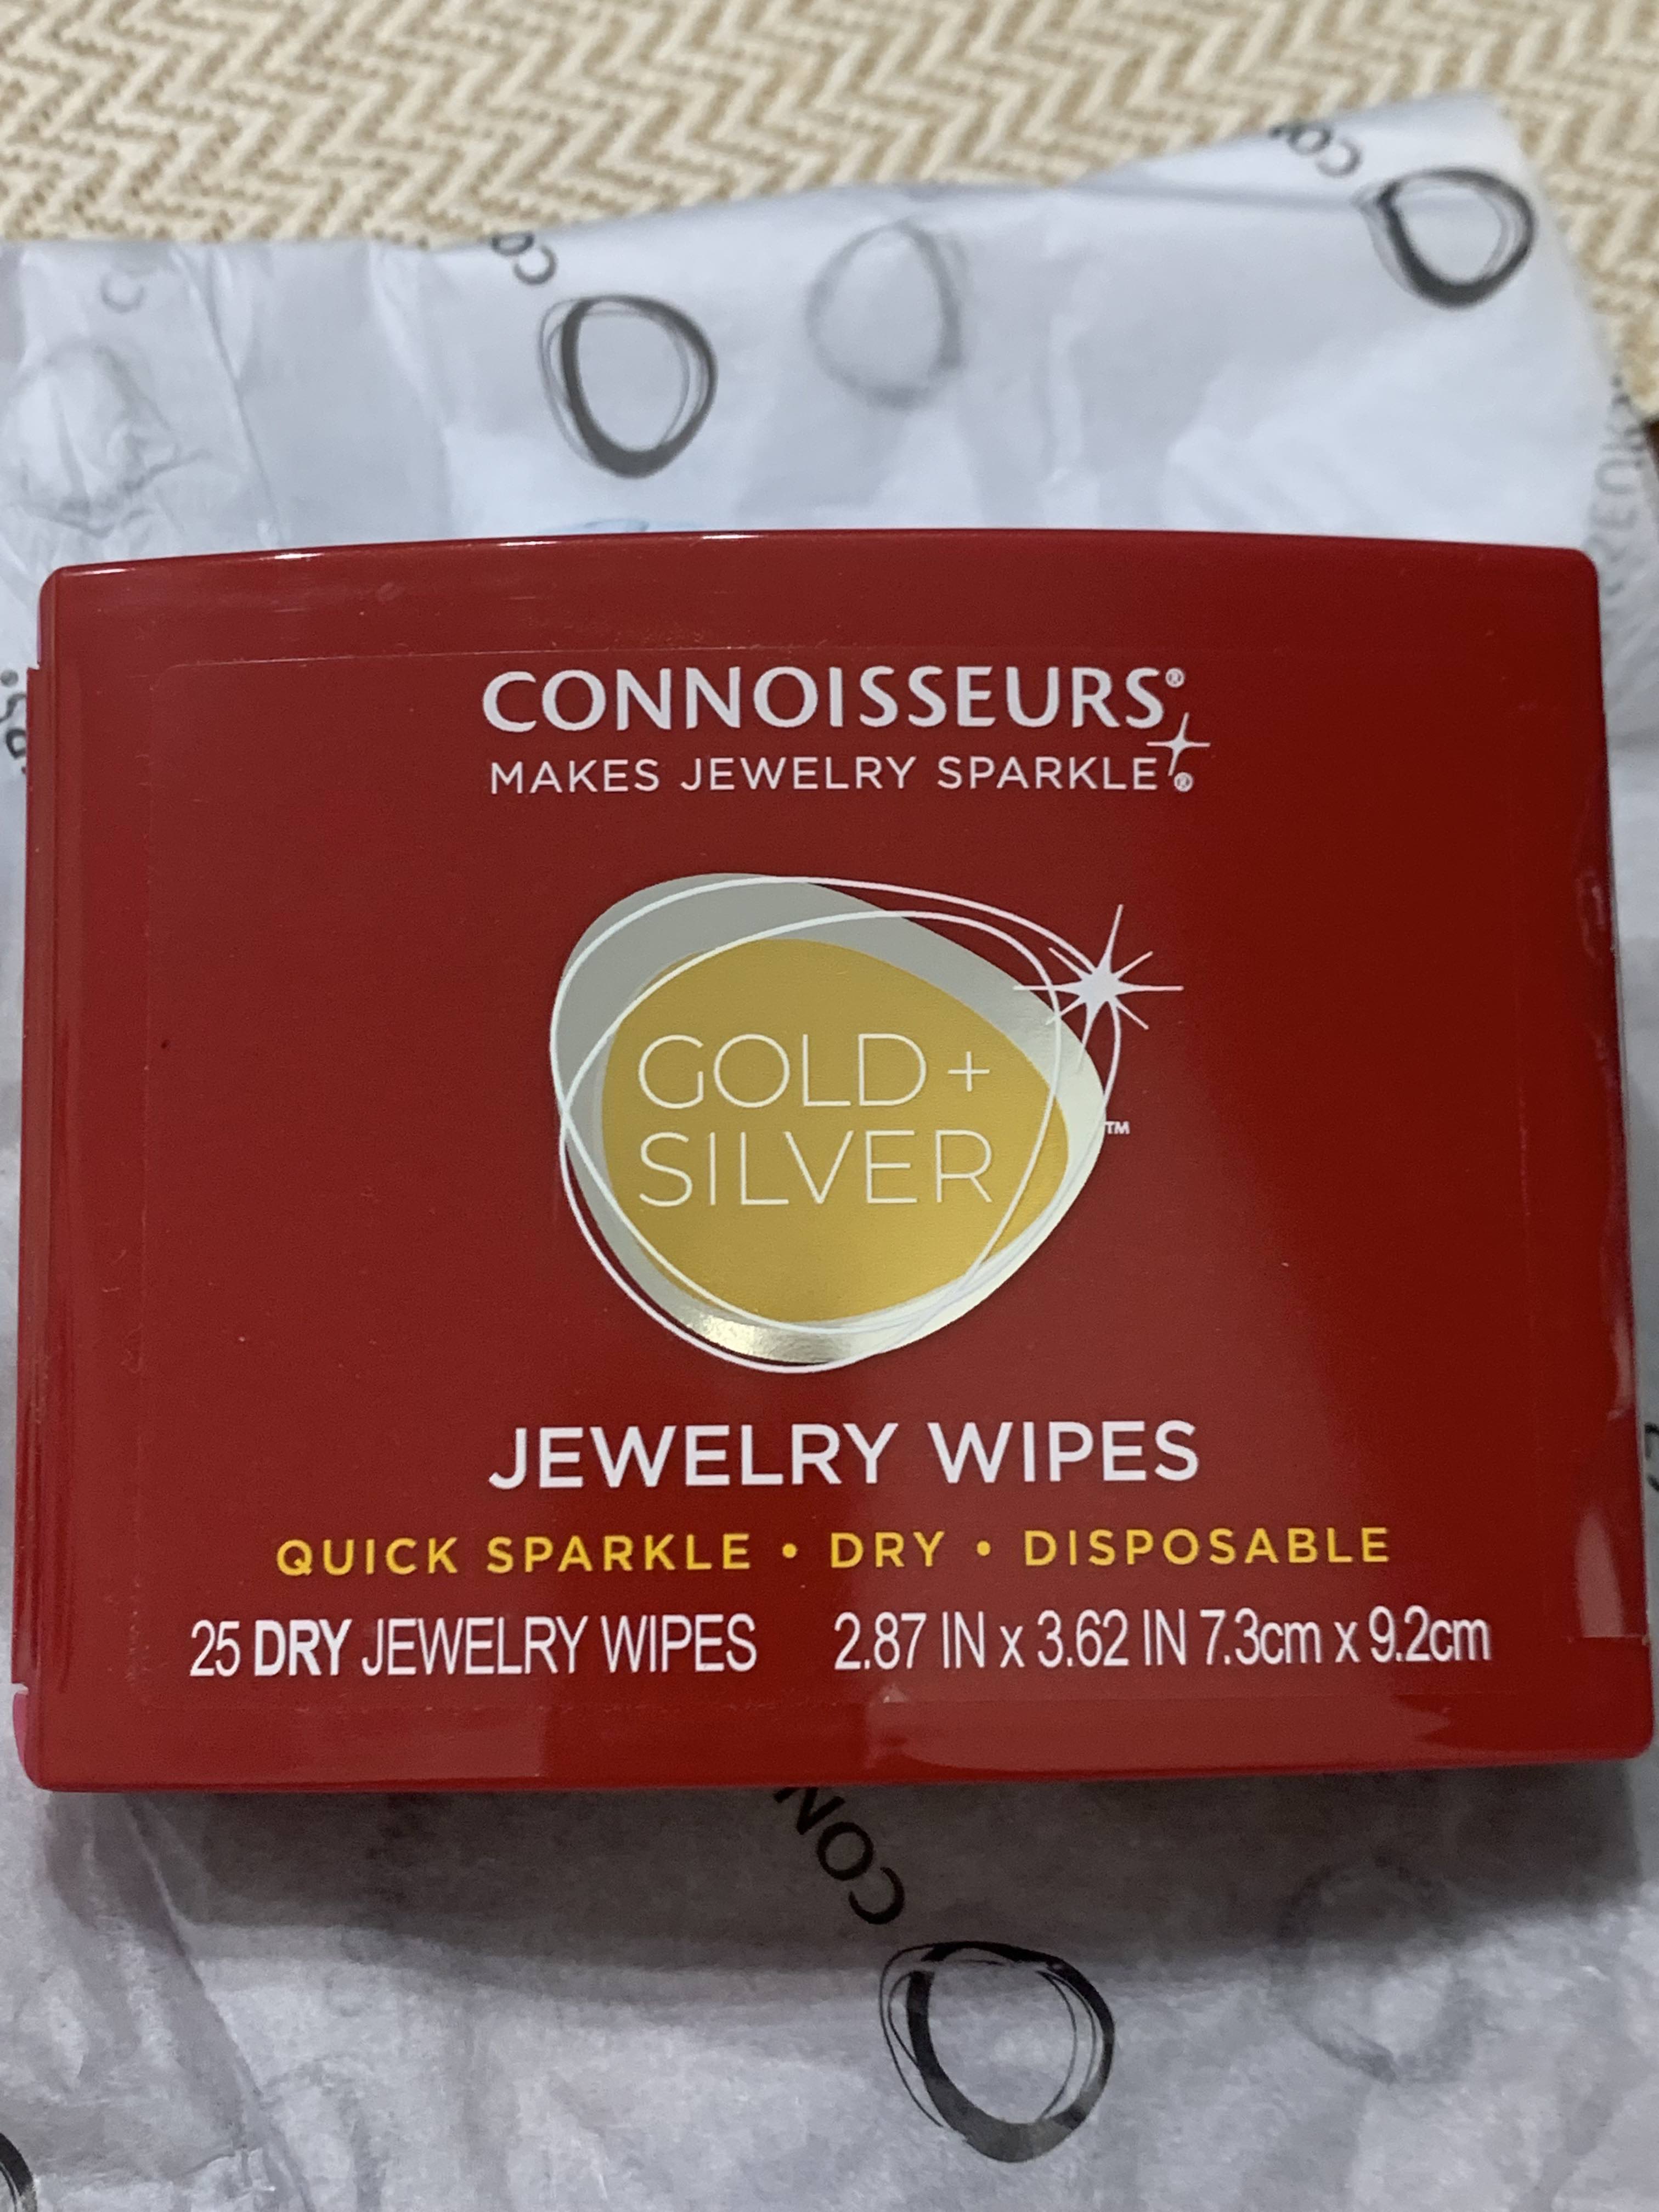 CONNOISSEURS JEWELRY WIPES 25 WIPES PER BOX